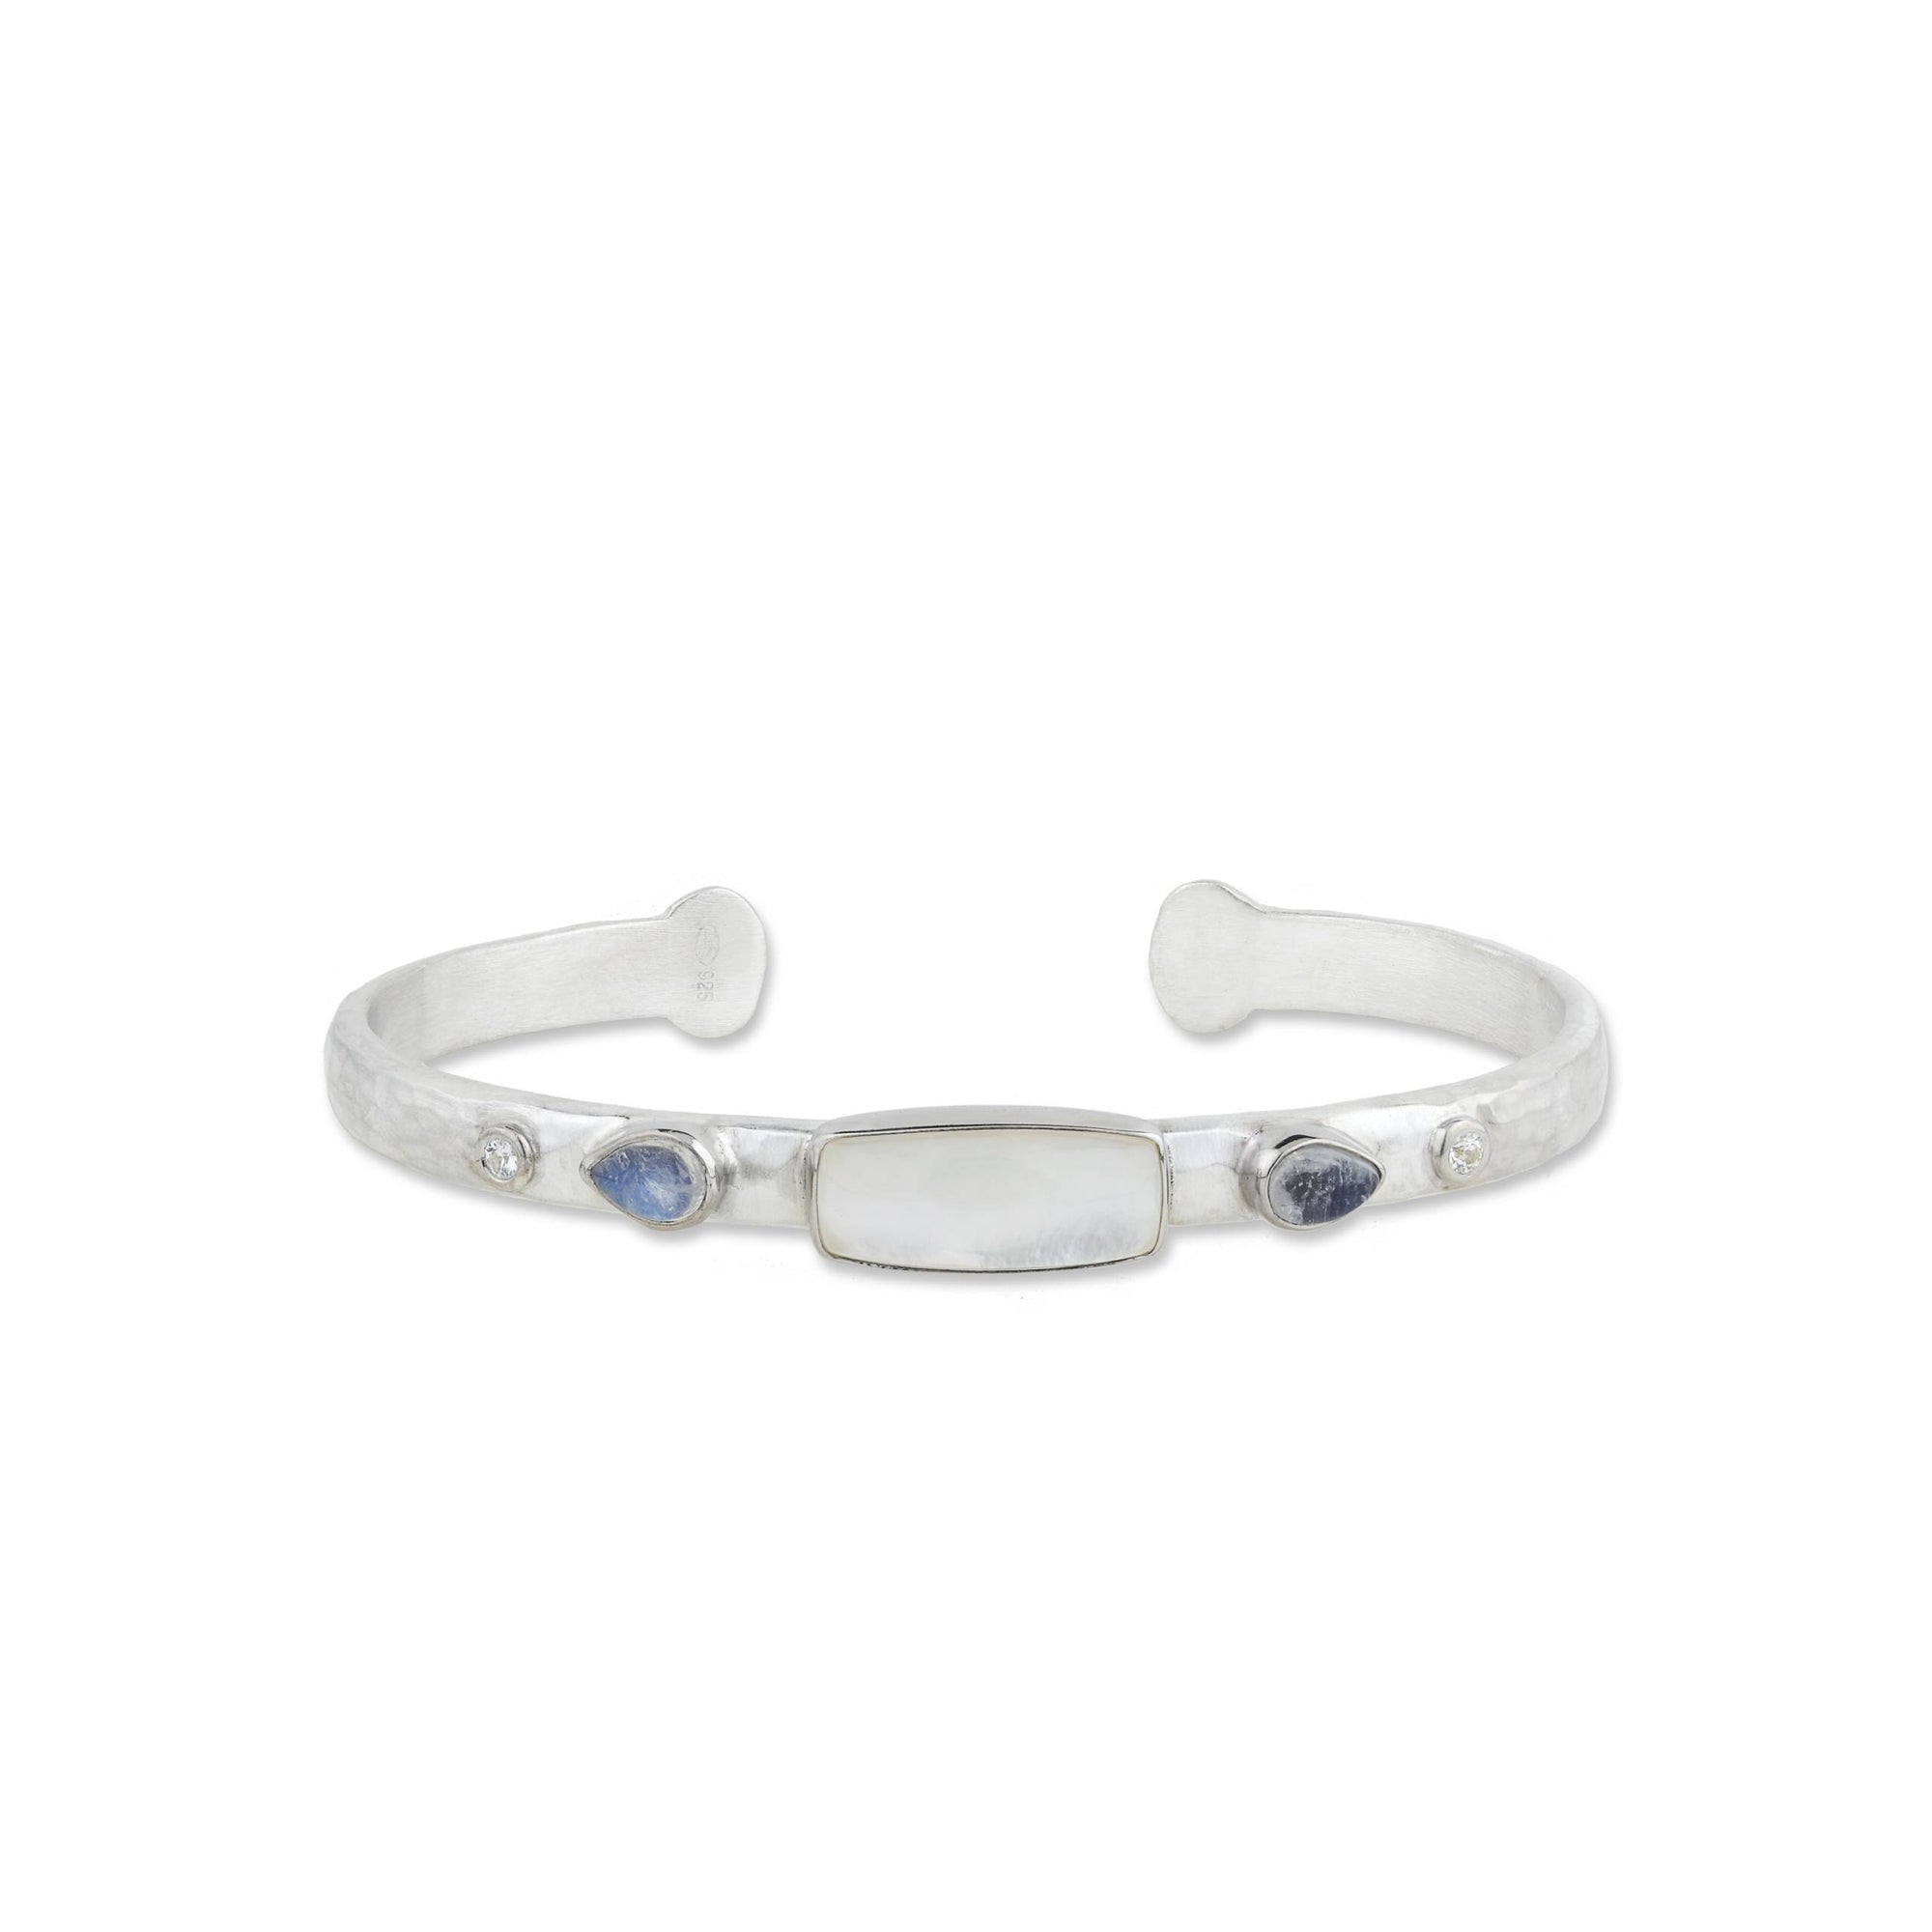 Lika Behar Sterling Silver “Moondance” Cuff Bracelet with Mother of Pearl & Moonstone